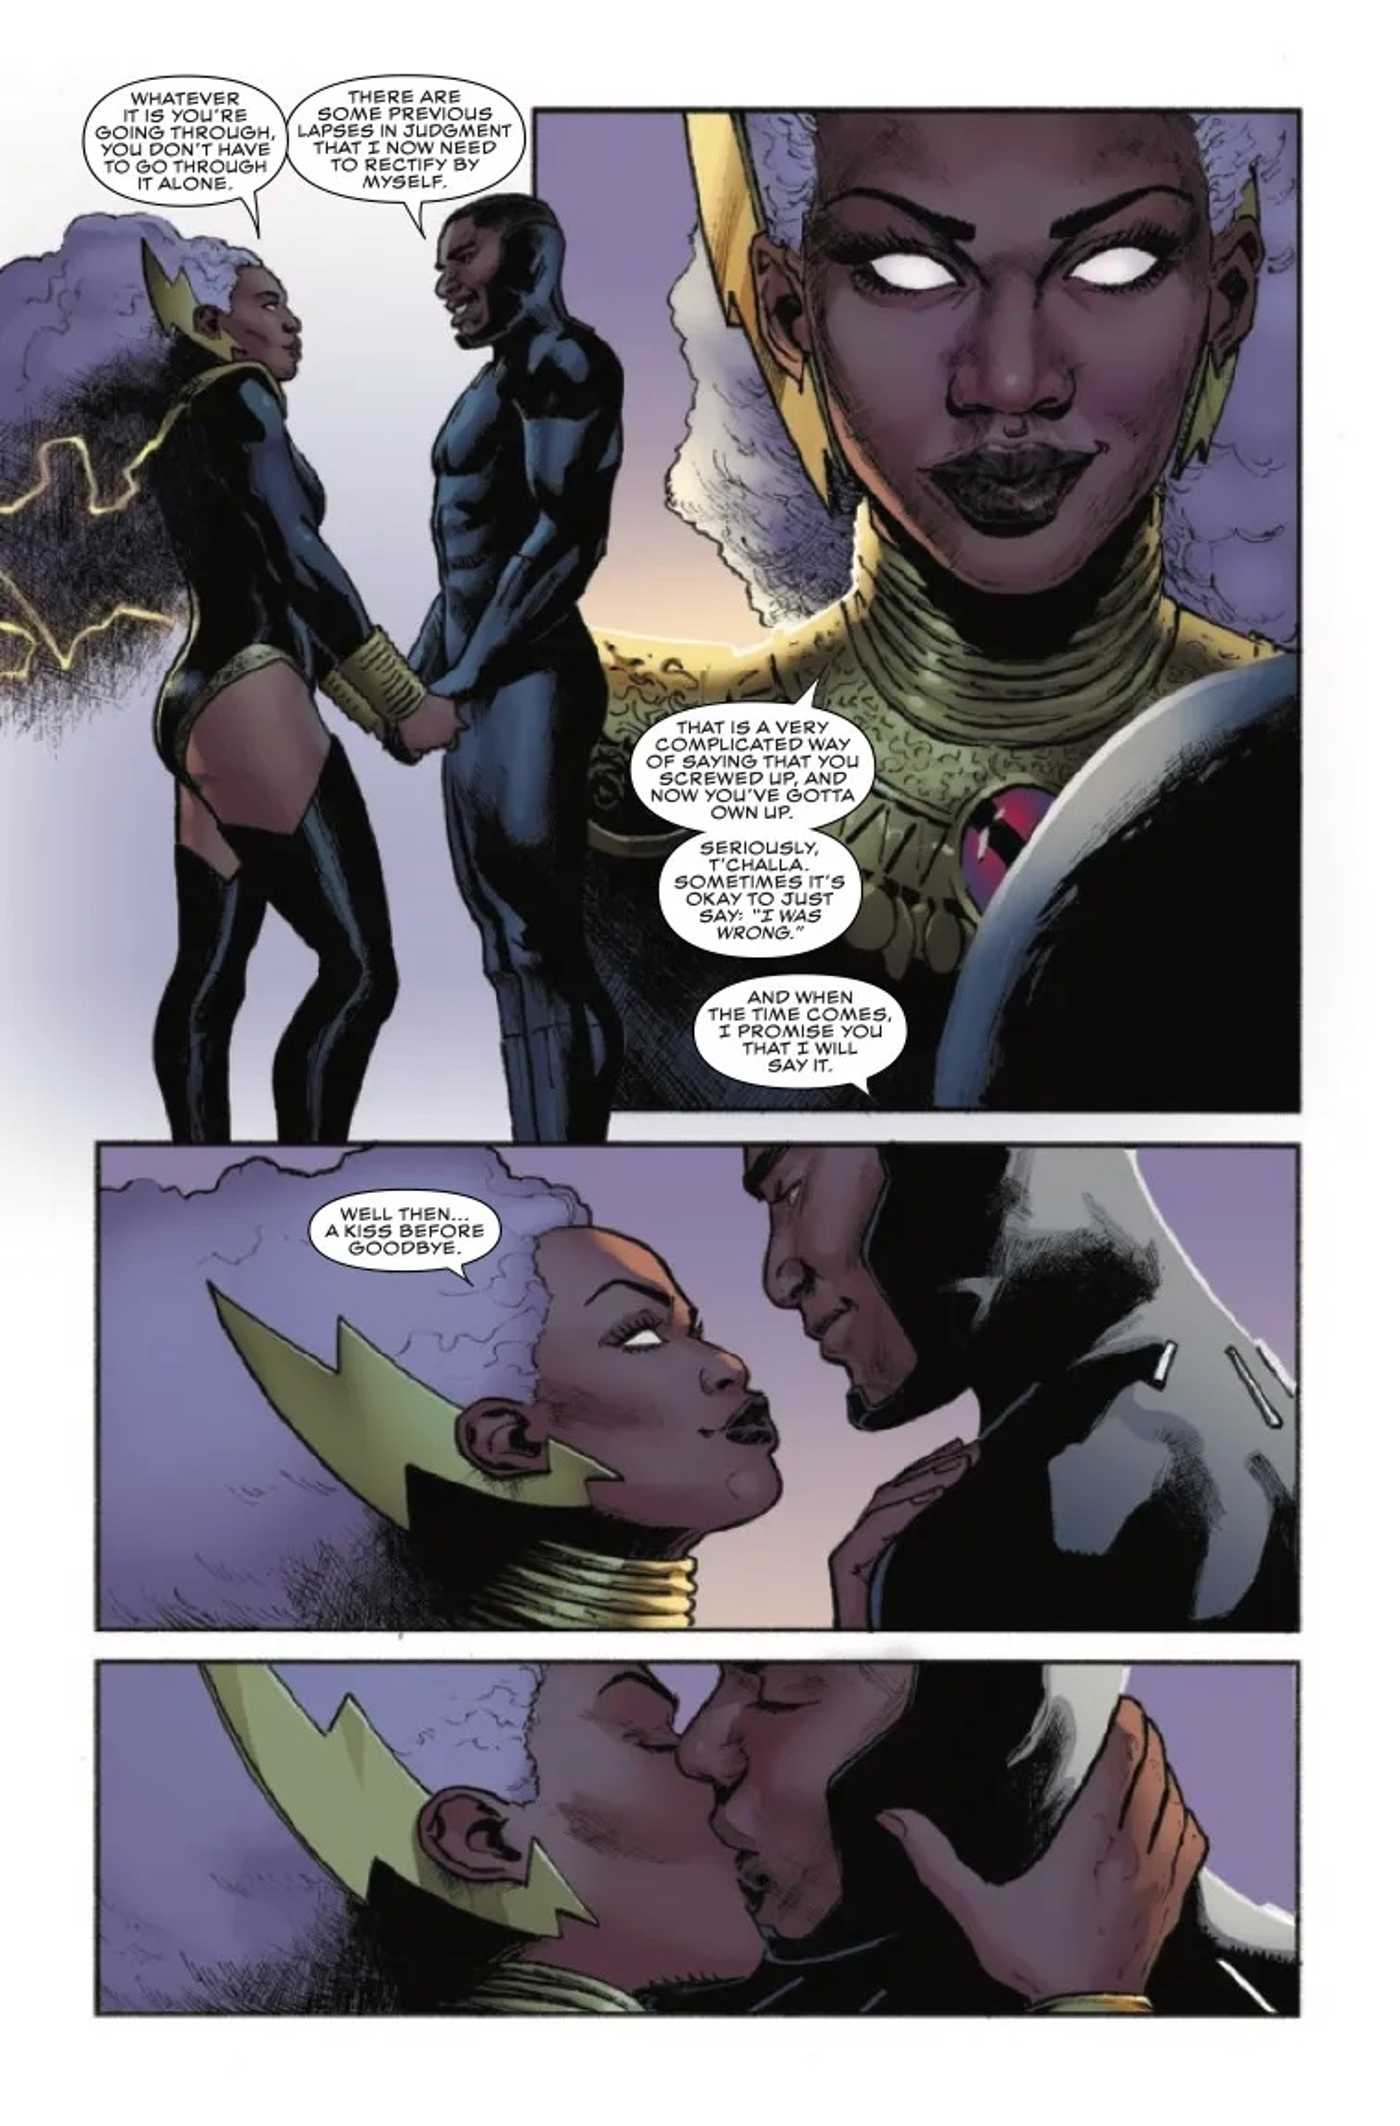 Black-Panther-4-page 2 preview